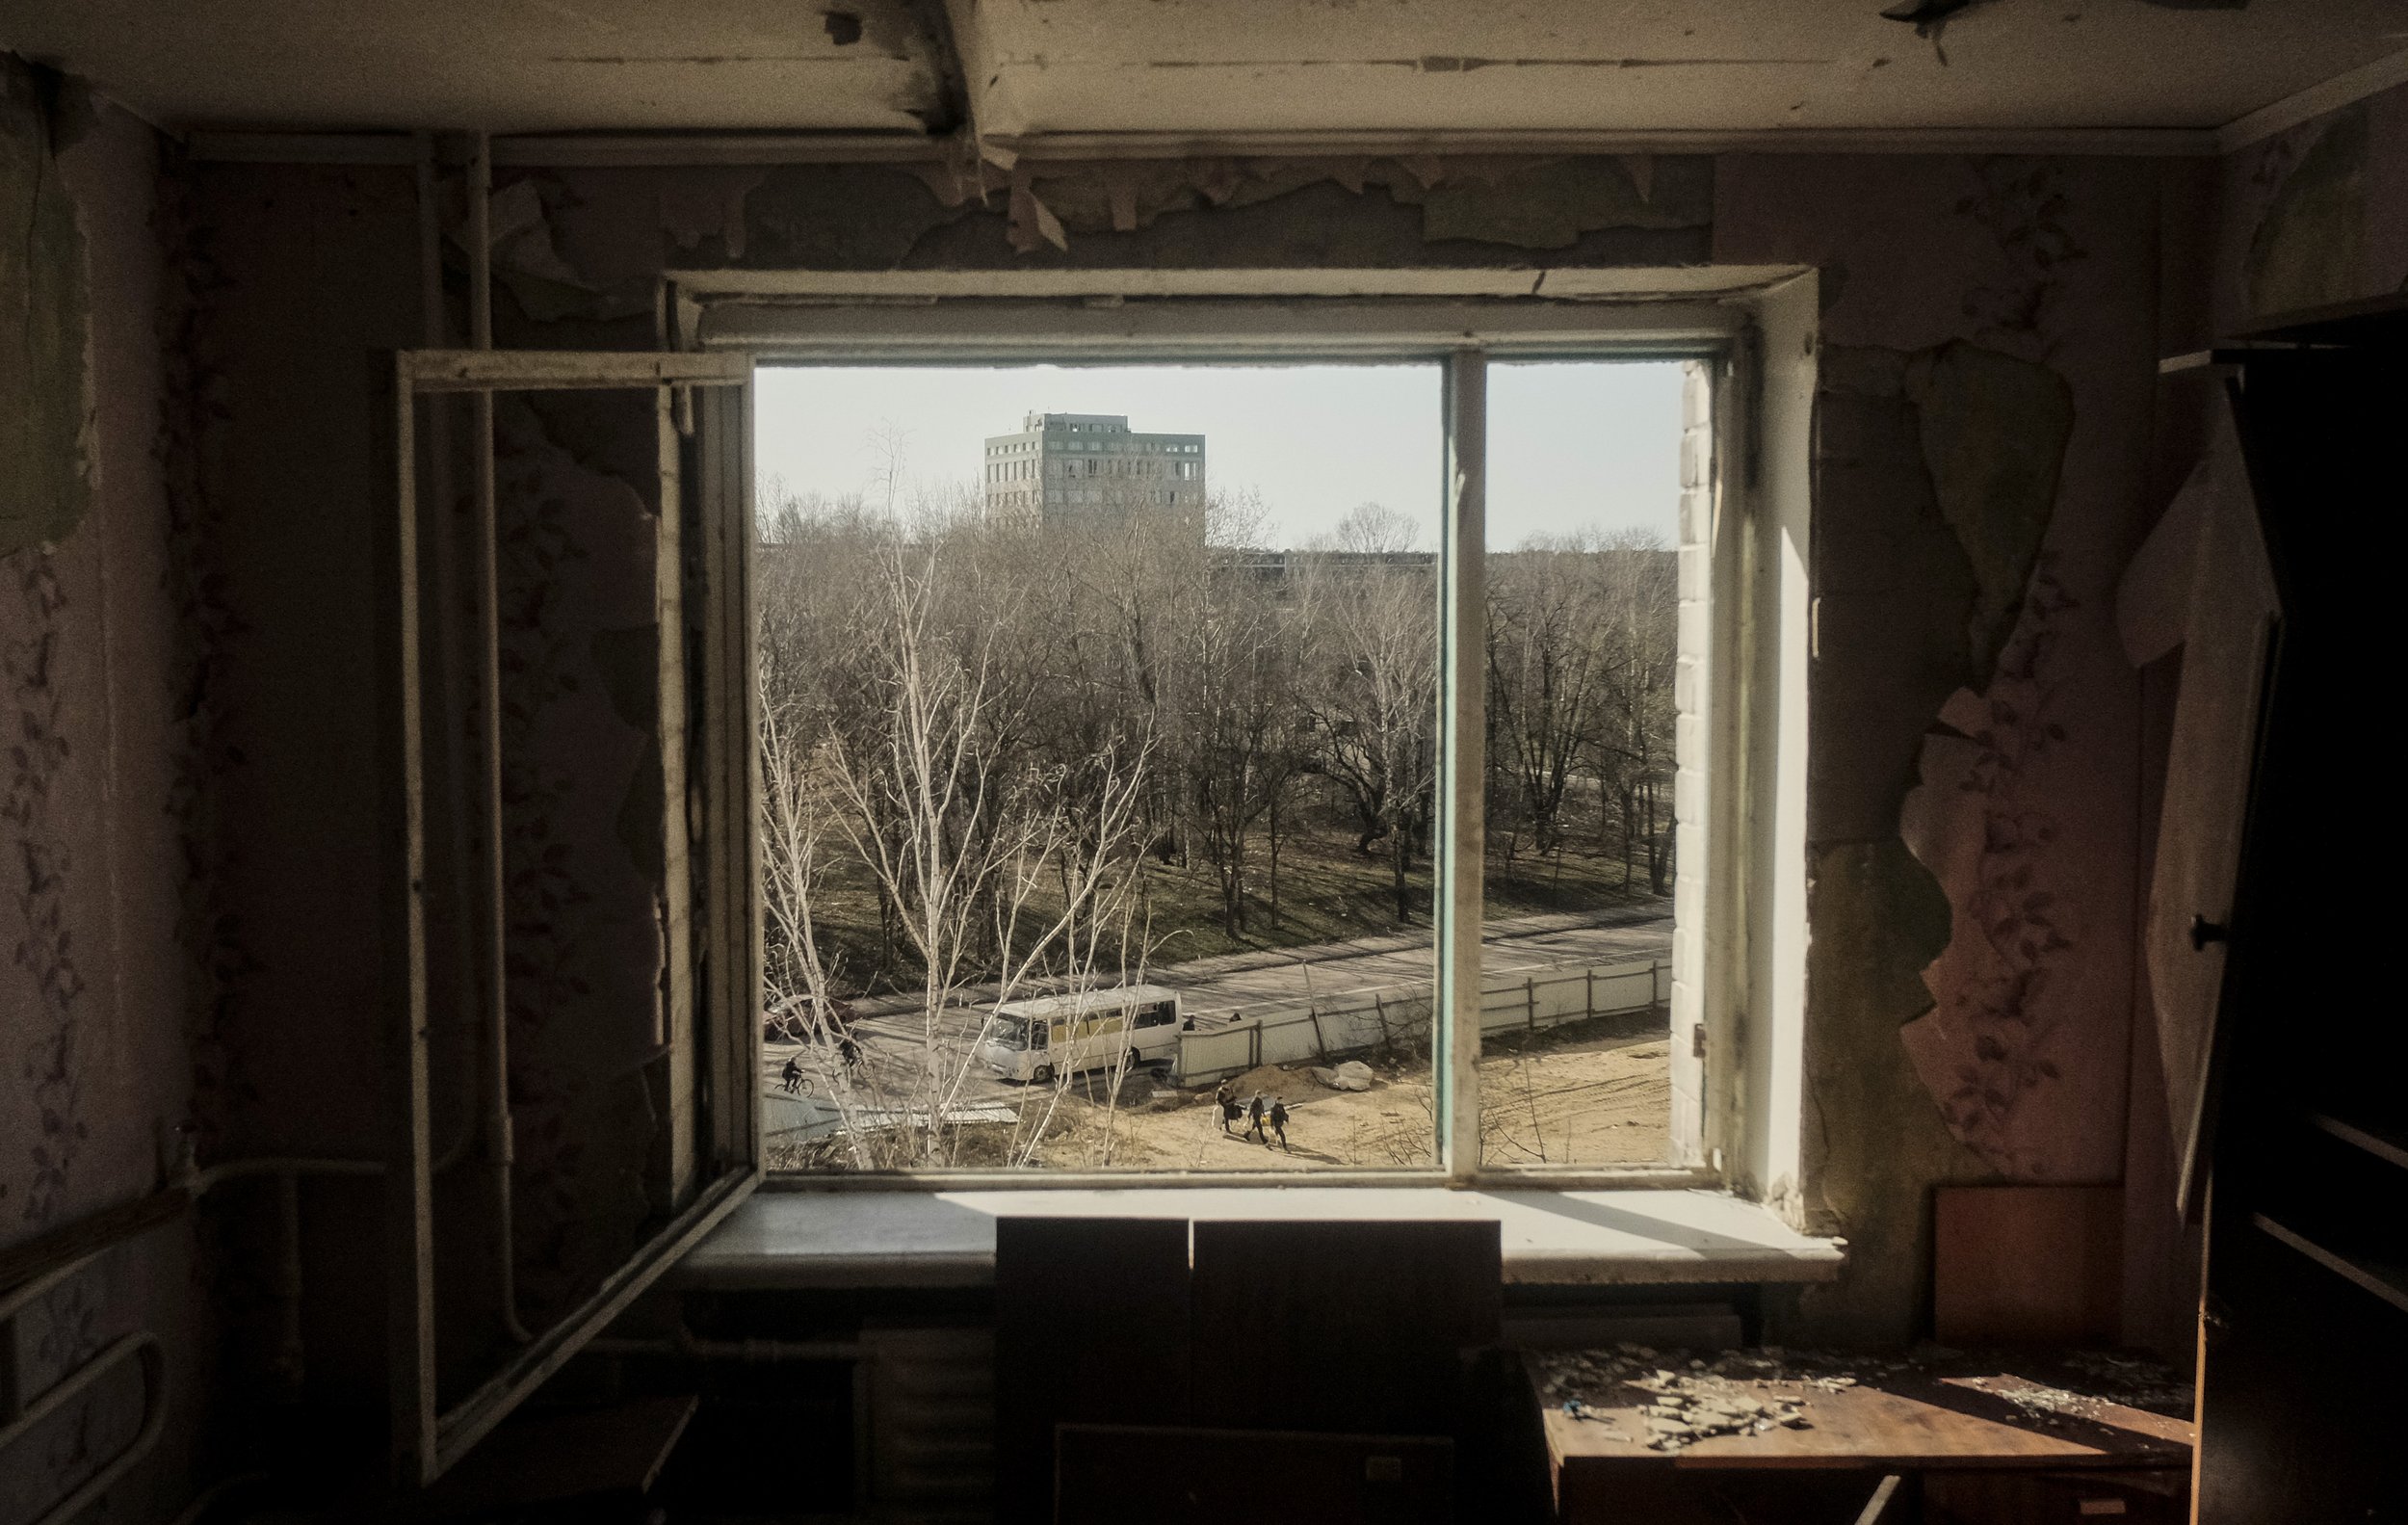  Soldiers are seen from a destroyed apartment building window exiting a bus to man positions in Chernihiv, Ukraine on April 15, 2022. Chernihiv saw intense fighting that destroyed much of the city and its infrastructure.  